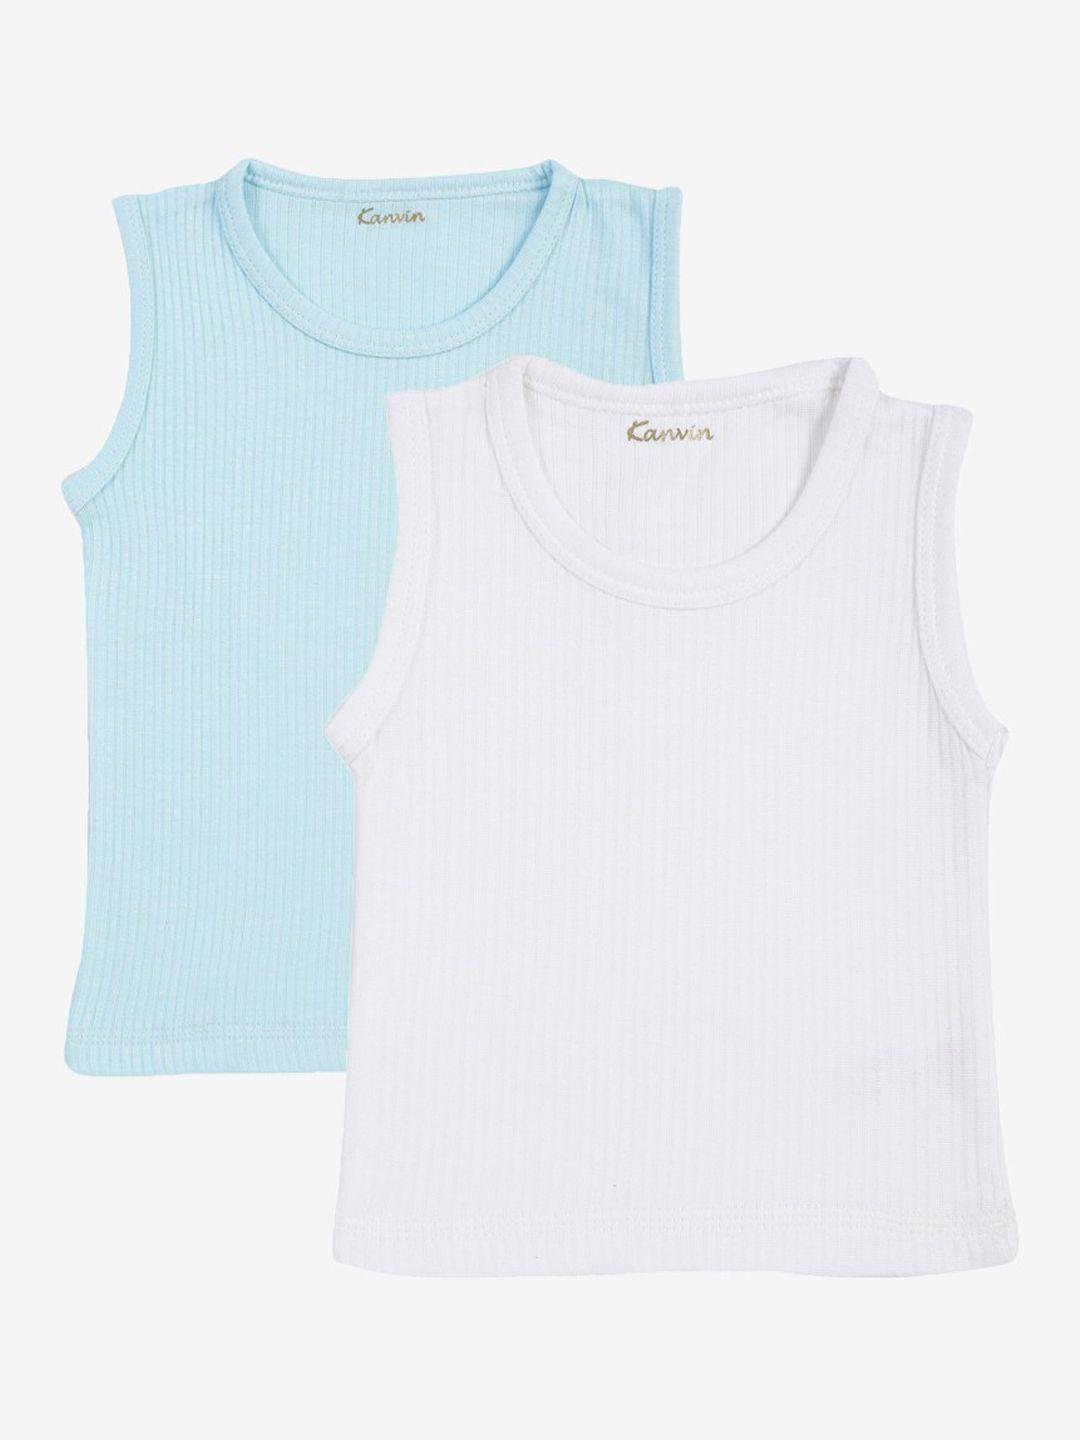 kanvin boys pack of 2 turquoise & white cotton ribbed thermal tops